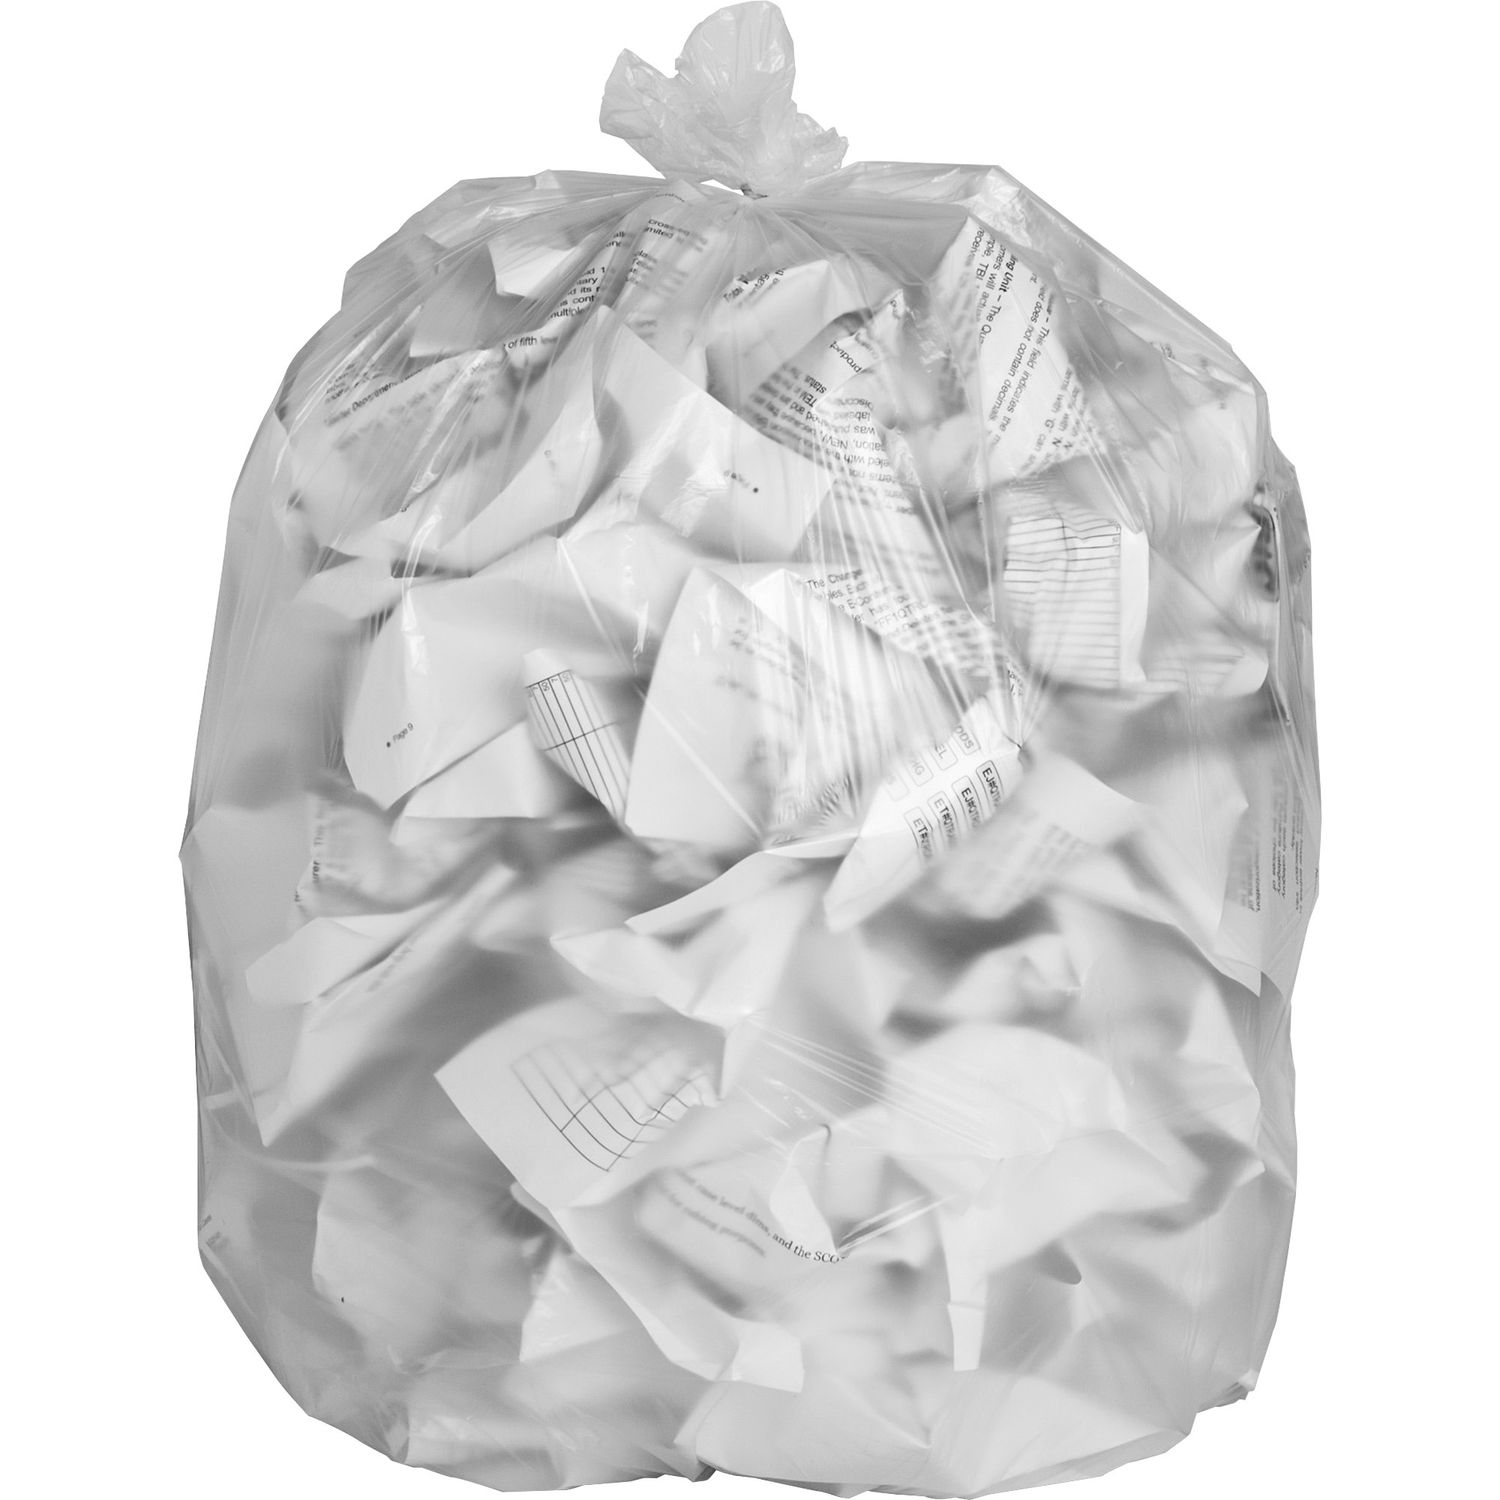 High-density Resin Trash Bags Medium Size, 30 gal, 30" Width x 36" Length x 0.31 mil (8 Micron) Thickness, High Density, Clear, Resin, 500/Carton, Industrial Trash, Office Waste